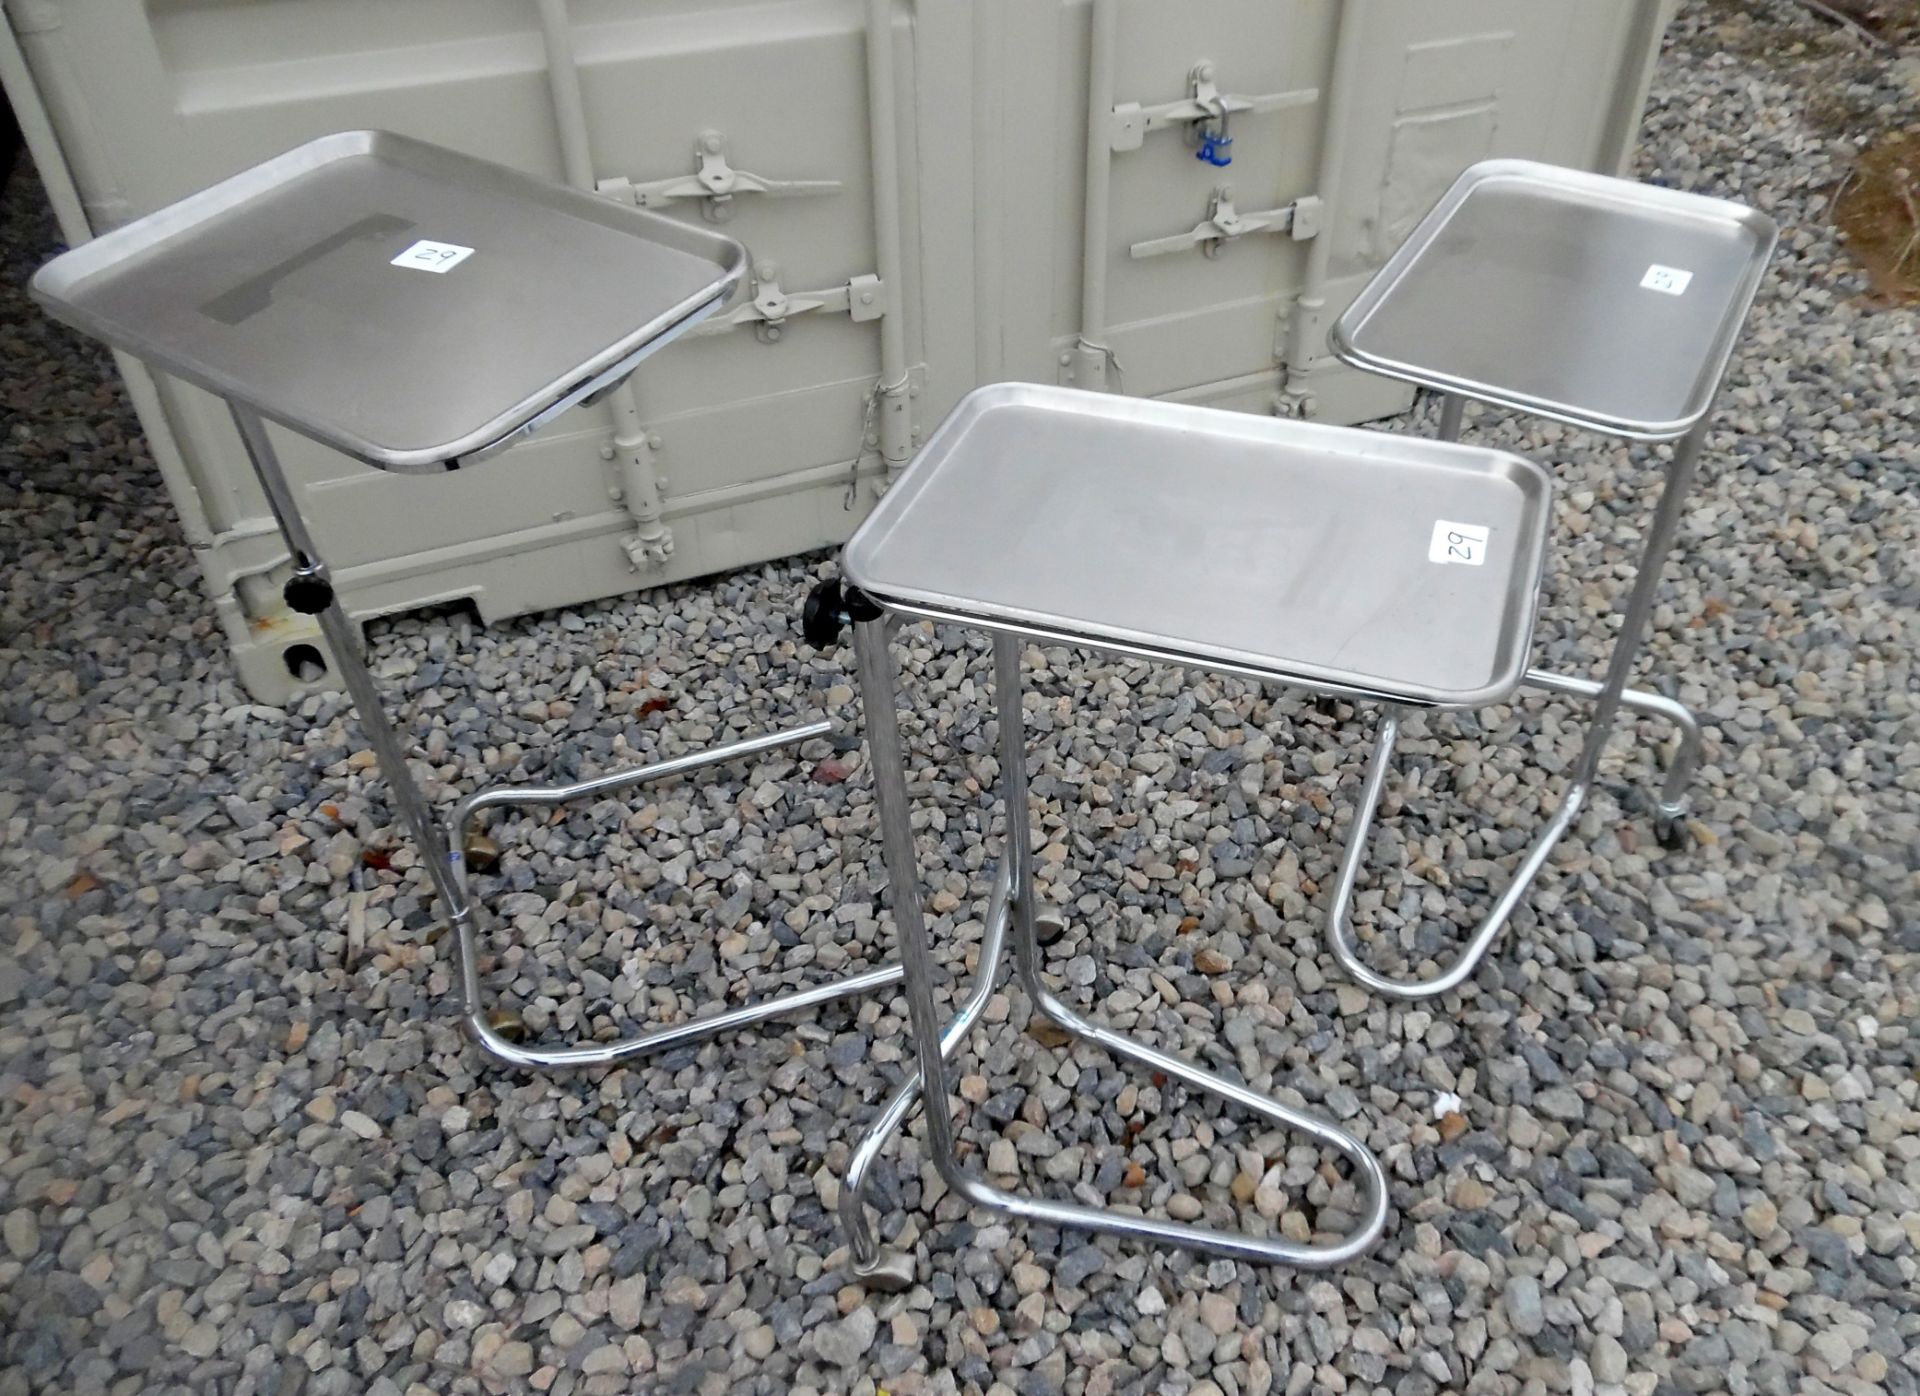 Lot of 3 Medical/surgical stands with trays.